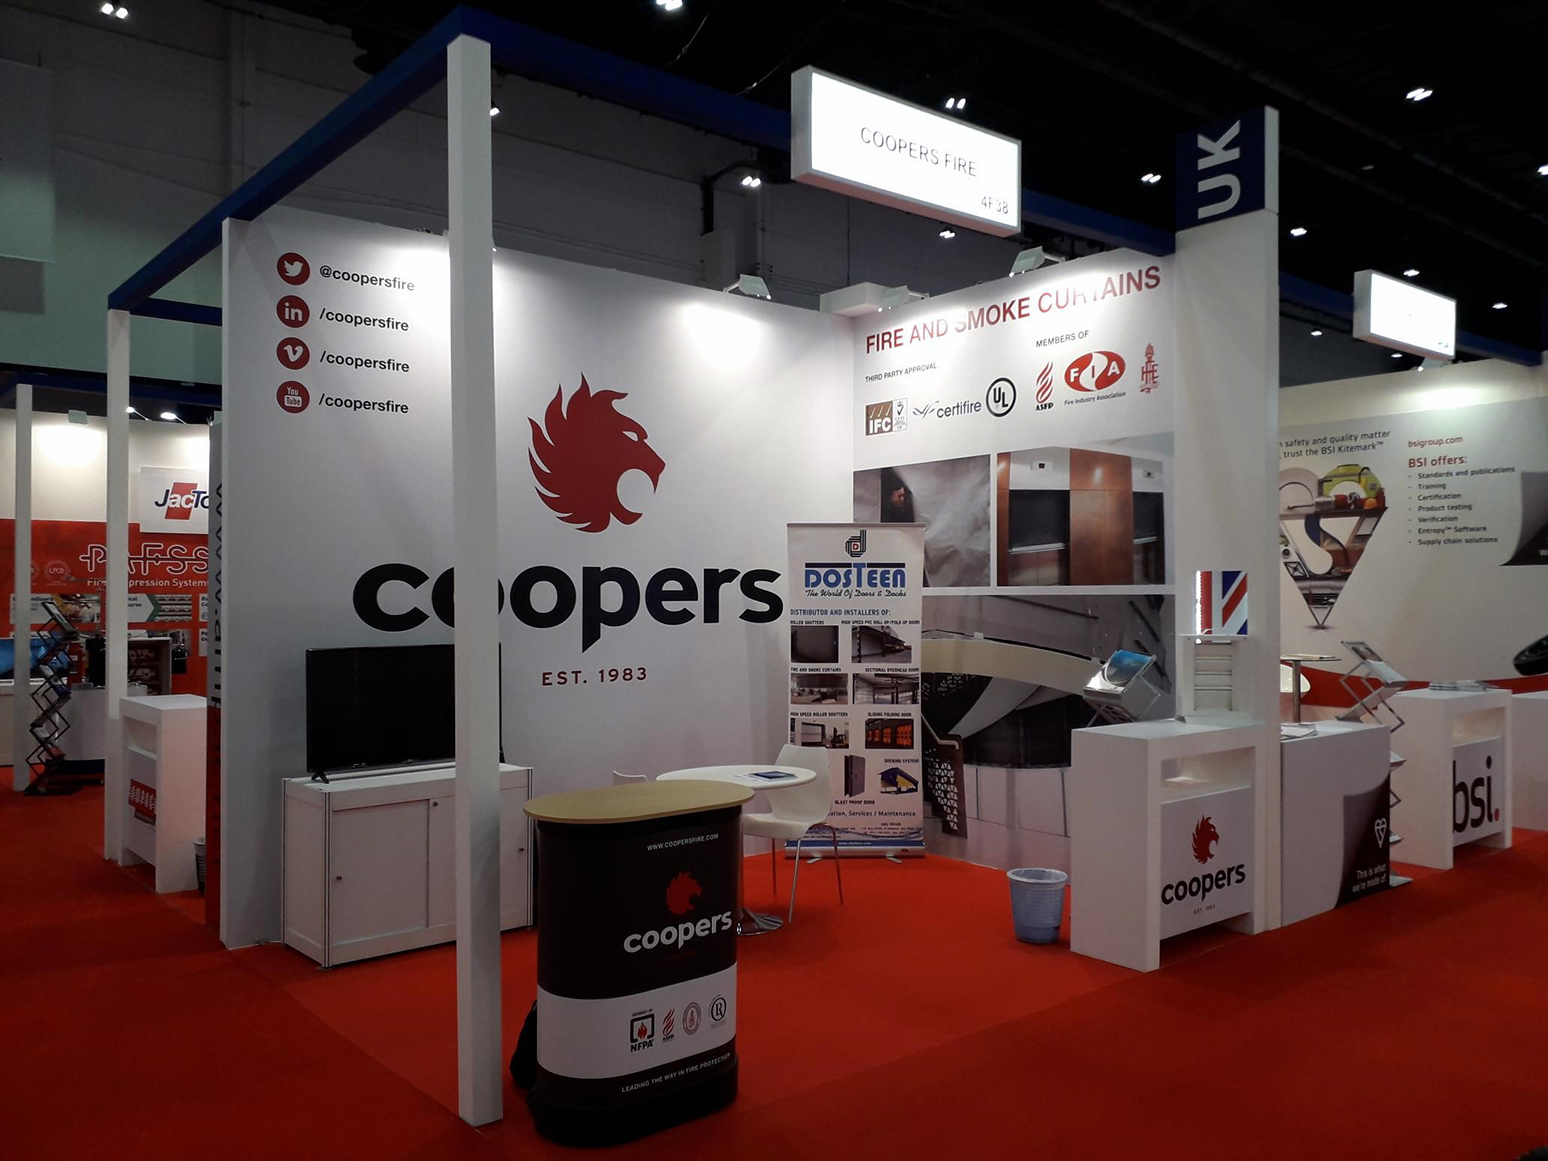 Coopers Fire showcasting fire curtain products at Intersec 2020